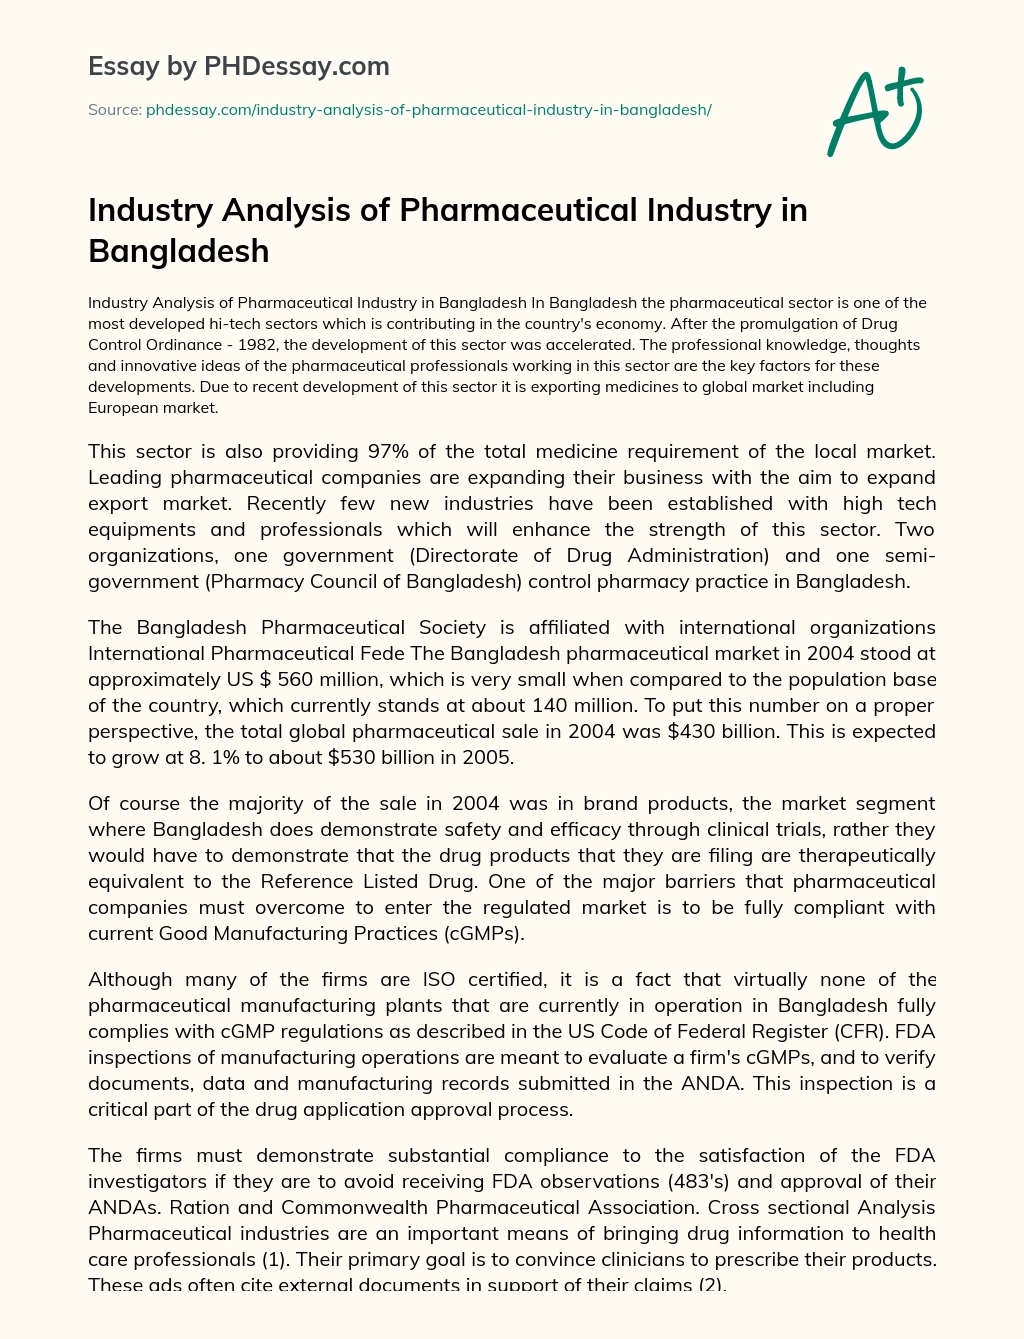 Industry Analysis of Pharmaceutical Industry in Bangladesh essay